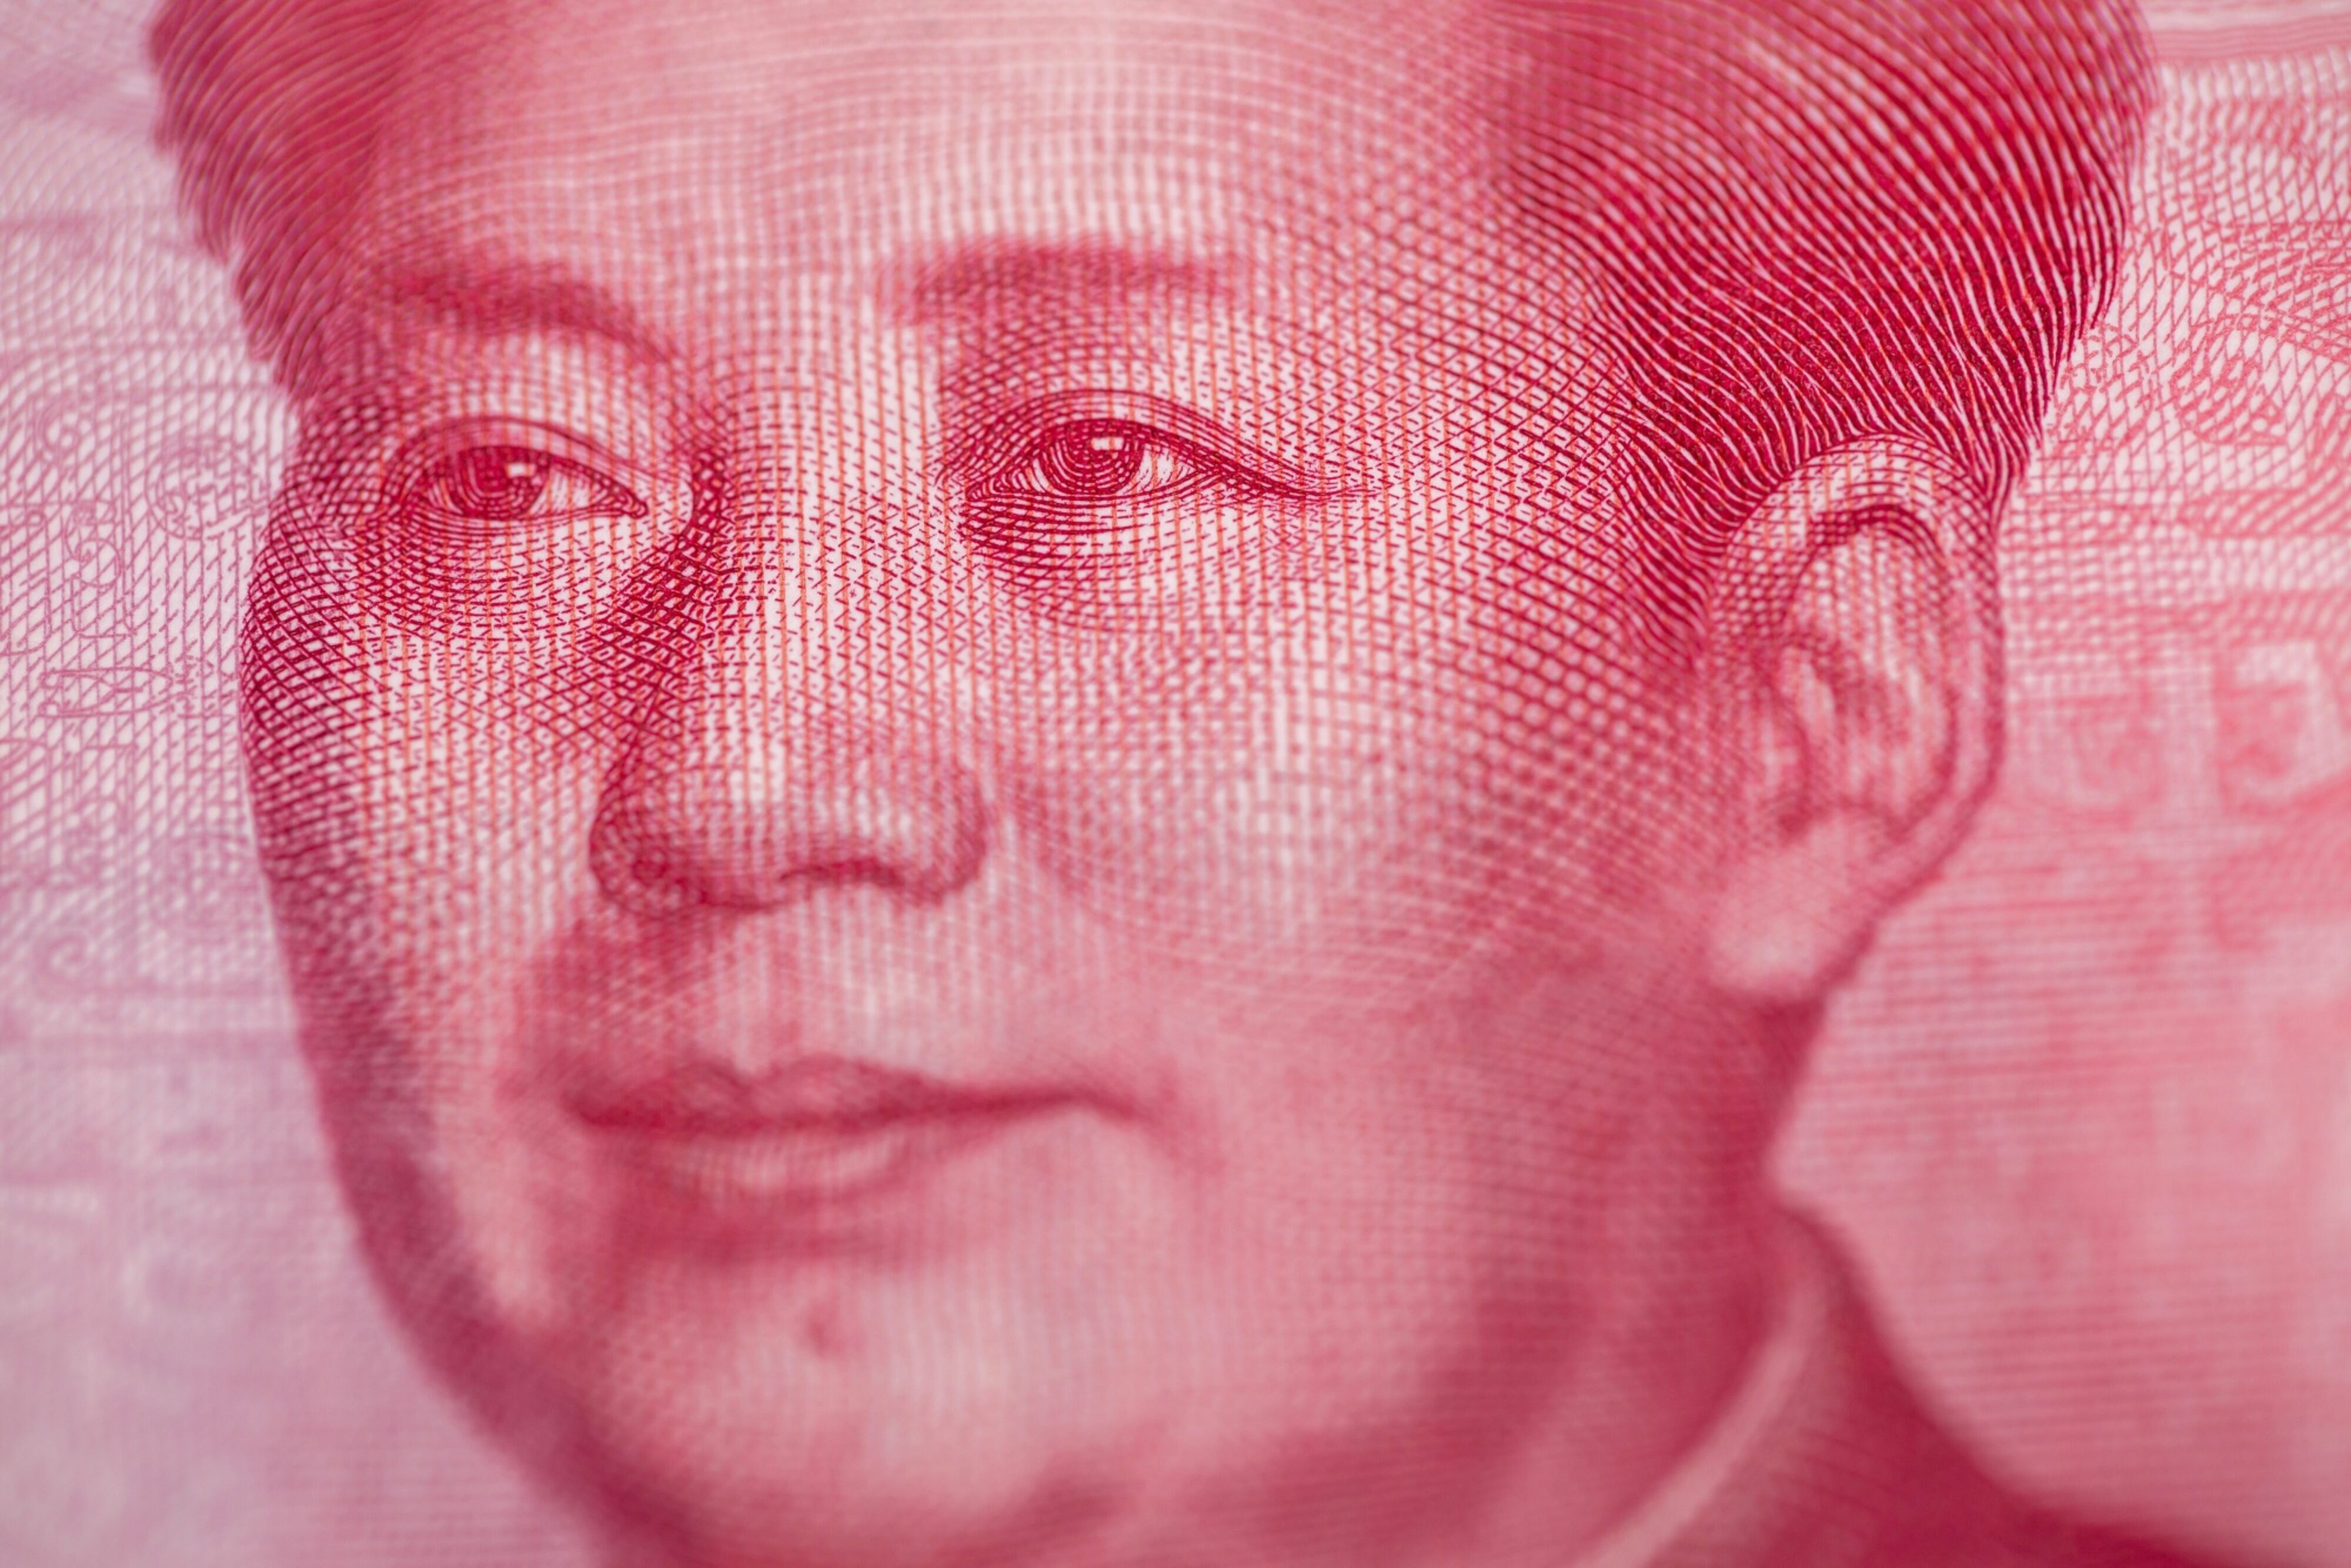 The yuan is among the worst-performing currencies in Asia this year, even as China has taken a suite of measures to slow its slump amid a patchy economic recovery. Photo: Bloomberg